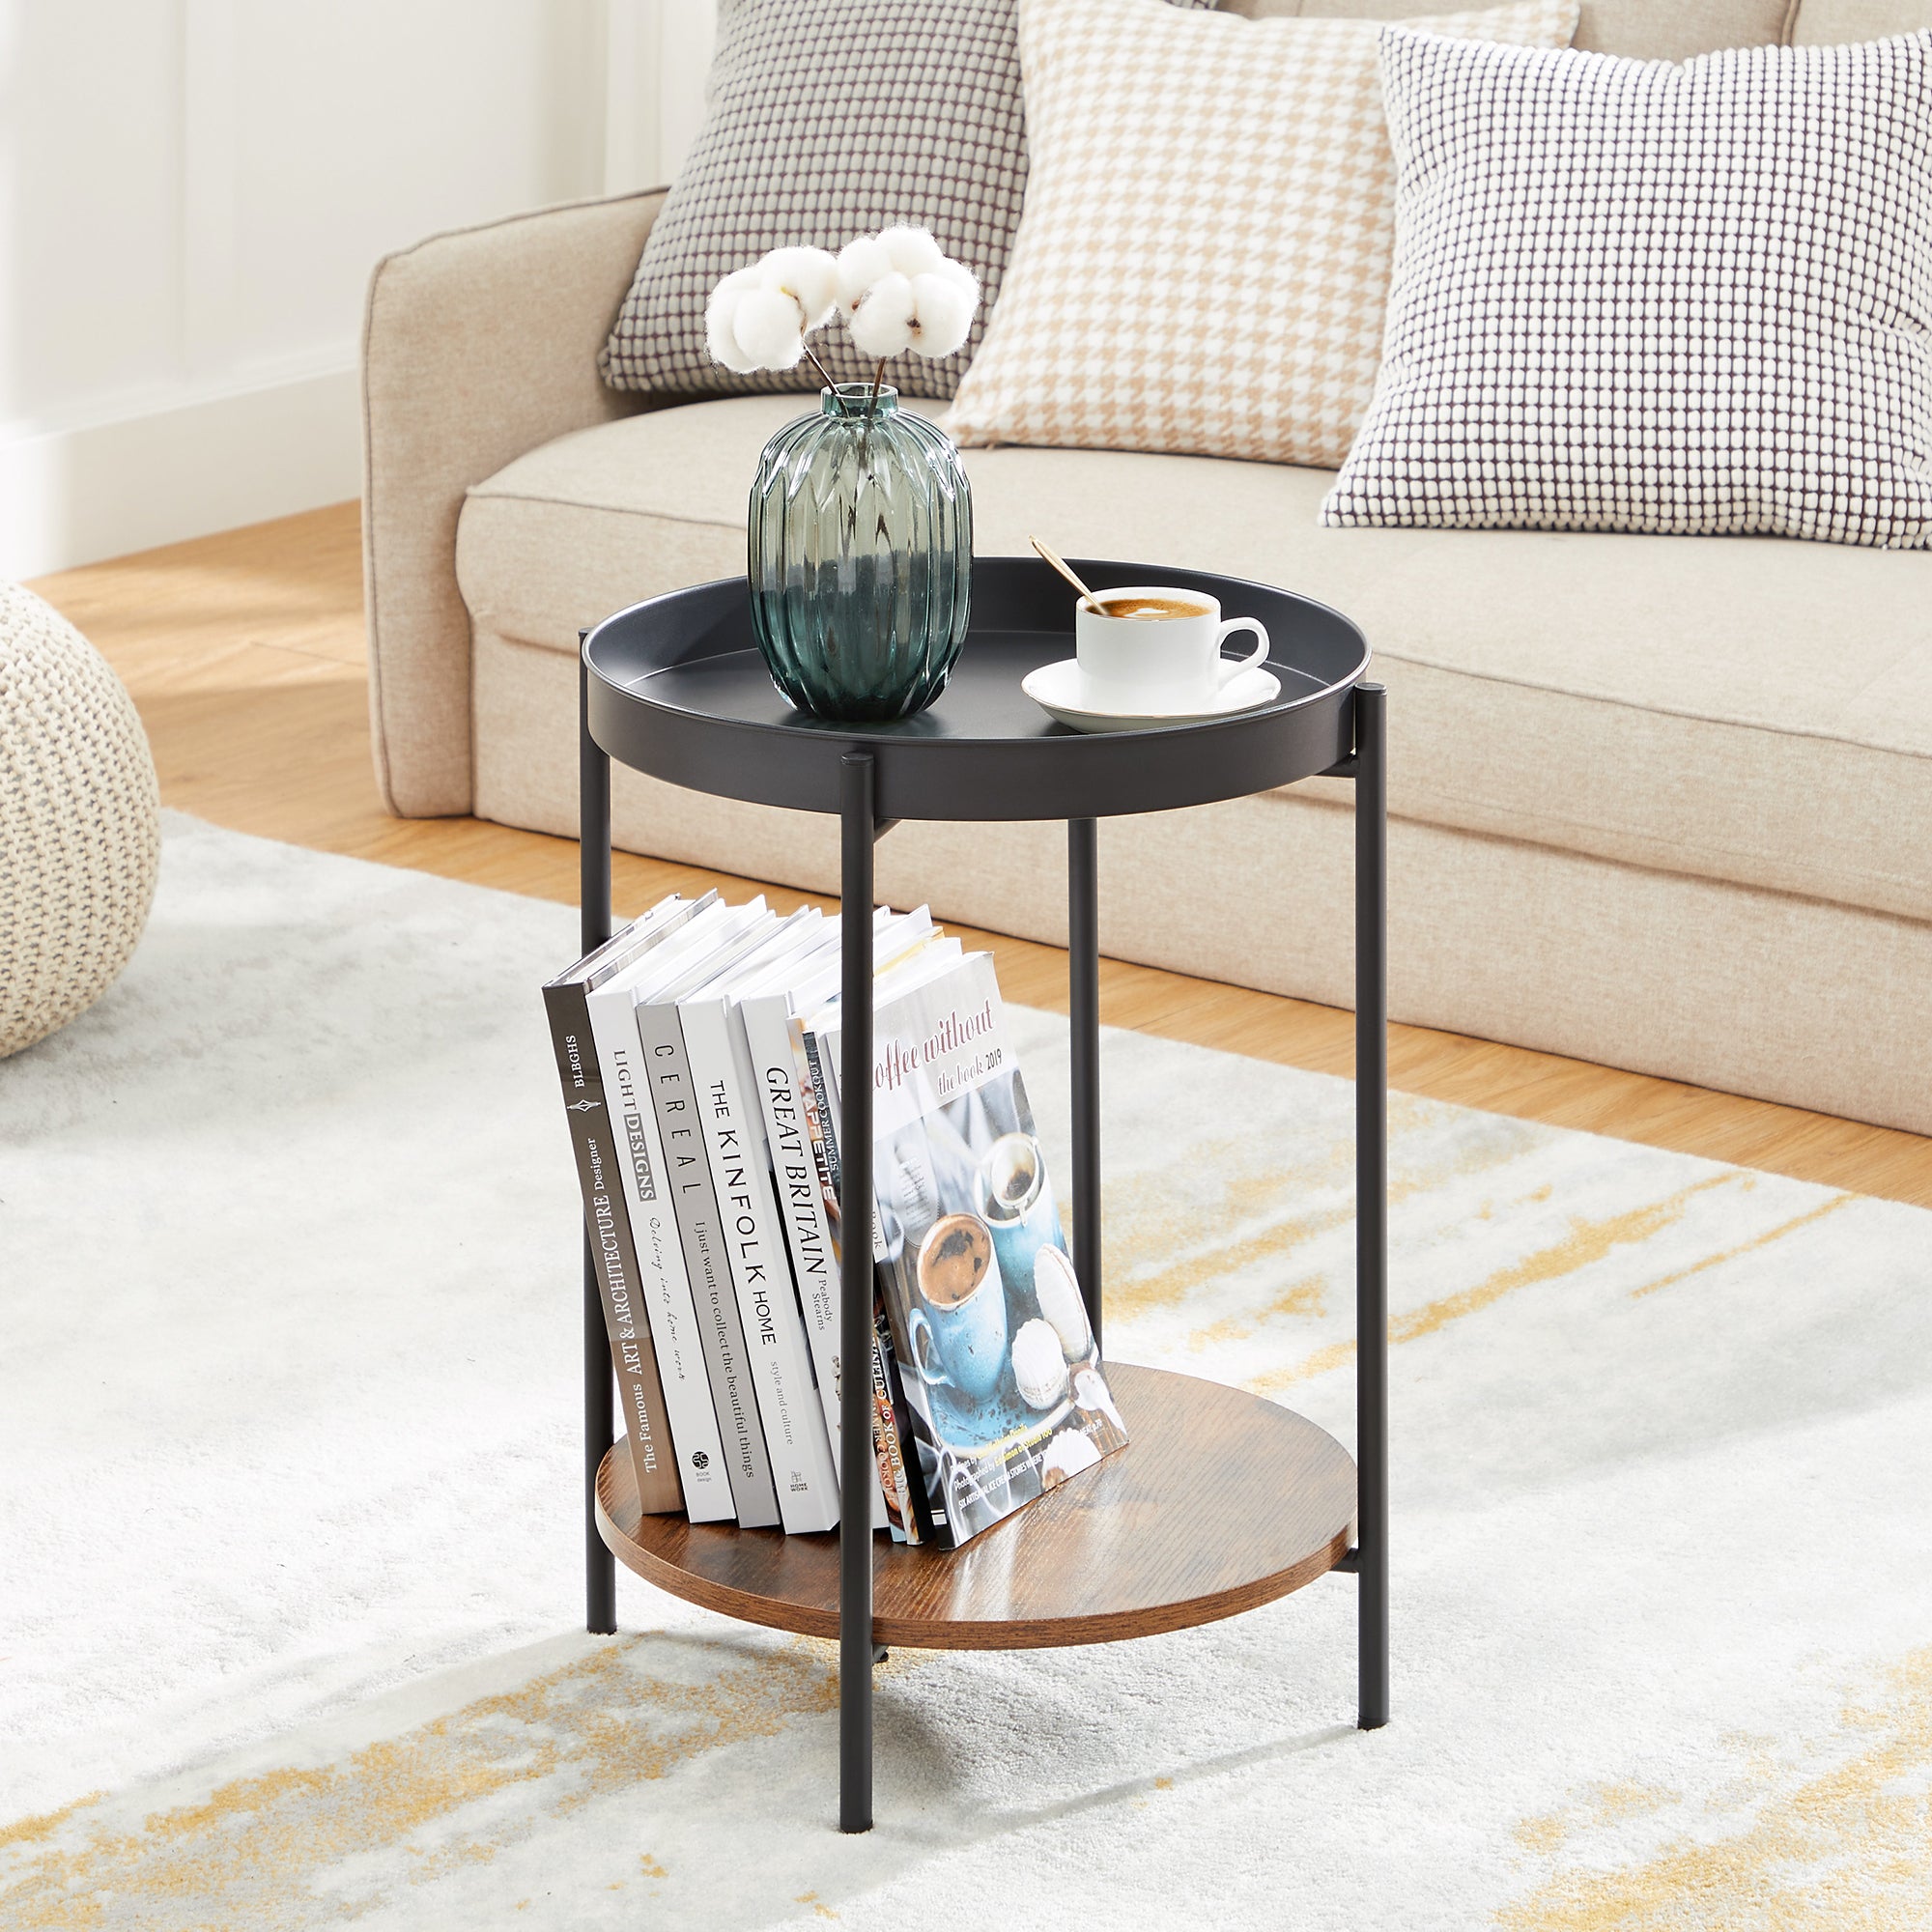 Vasagle Stylish Bedside Table round Side Table End Table